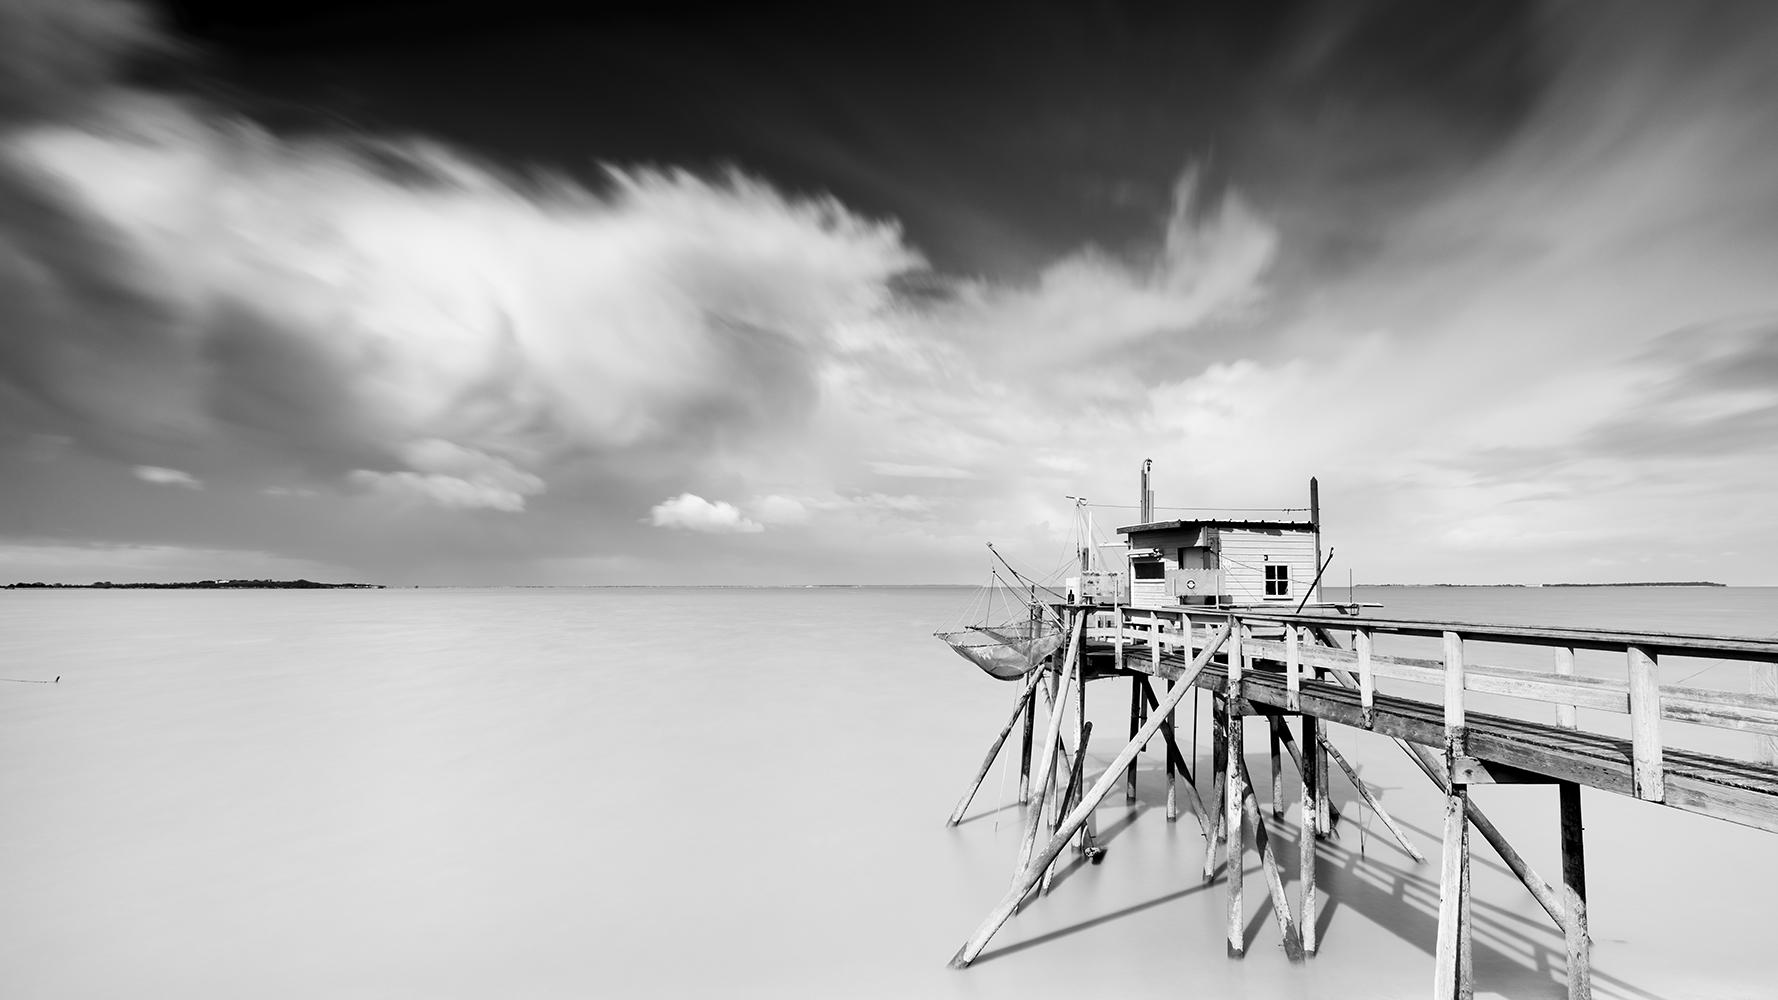 Gerald Berghammer Black and White Photograph - Fishing Hut on Stilts, Panorama, giant Clouds, fine art landscape photography